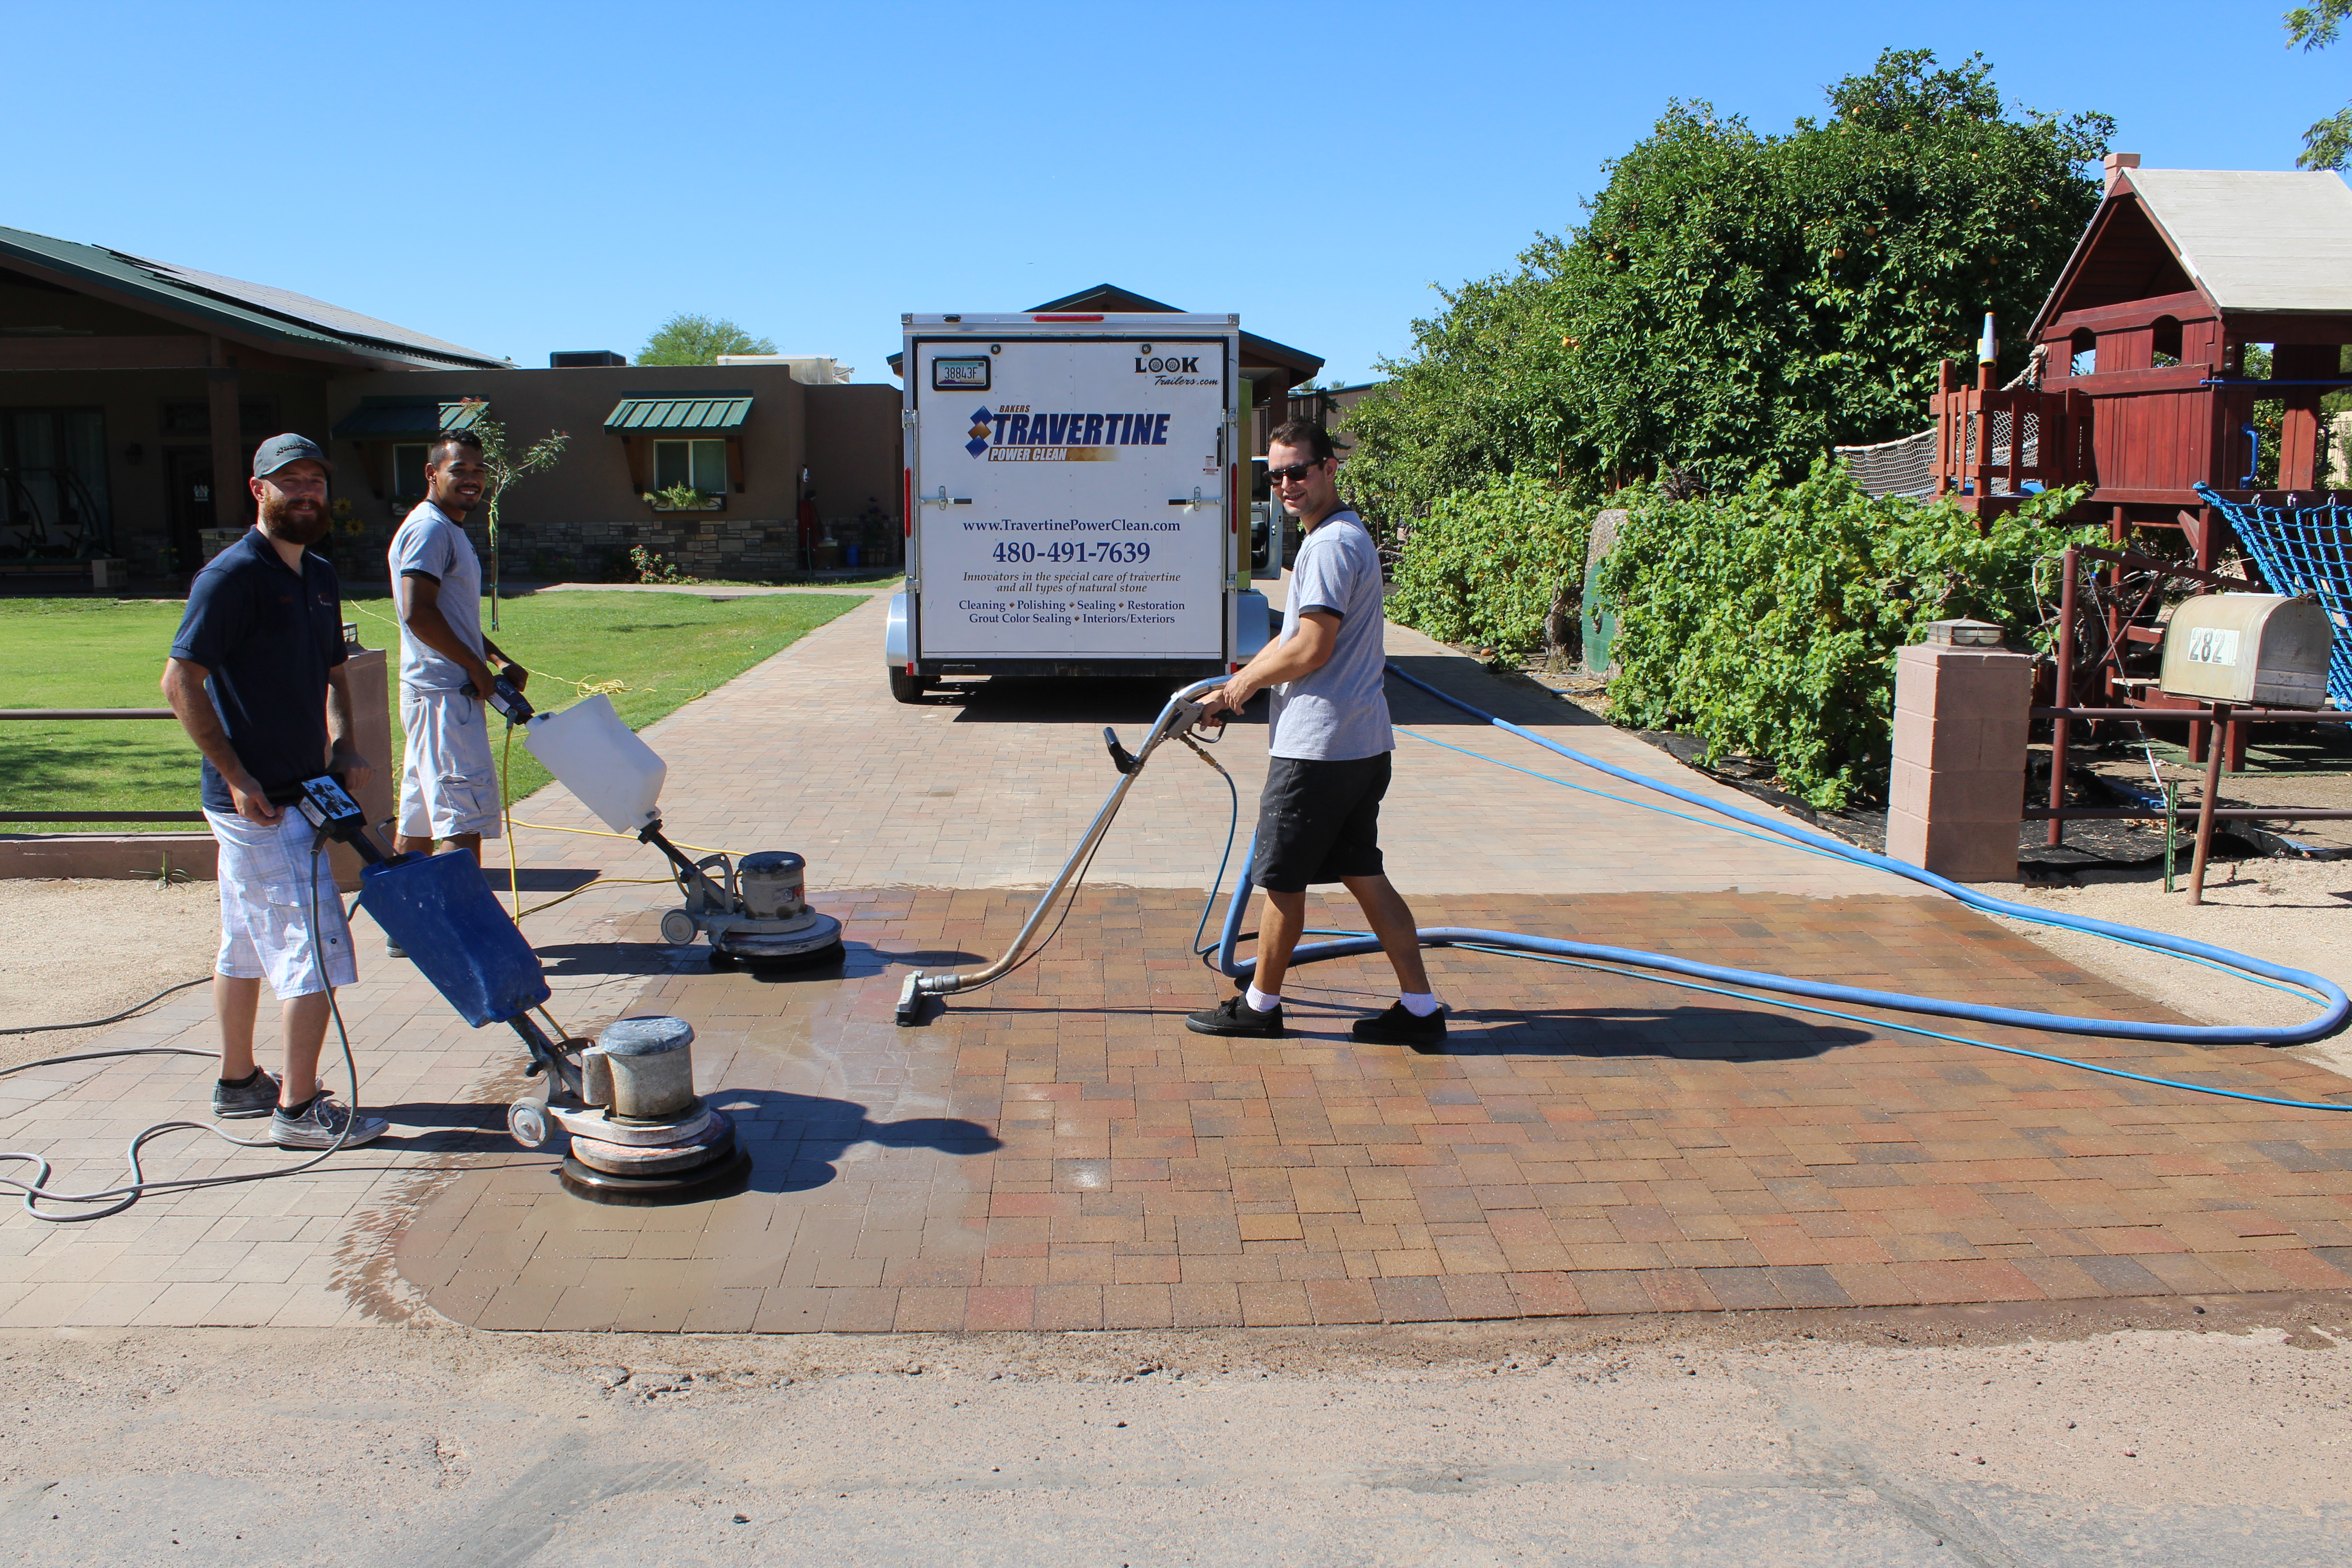 Cleaning concrete pavers requires care to avoid damage